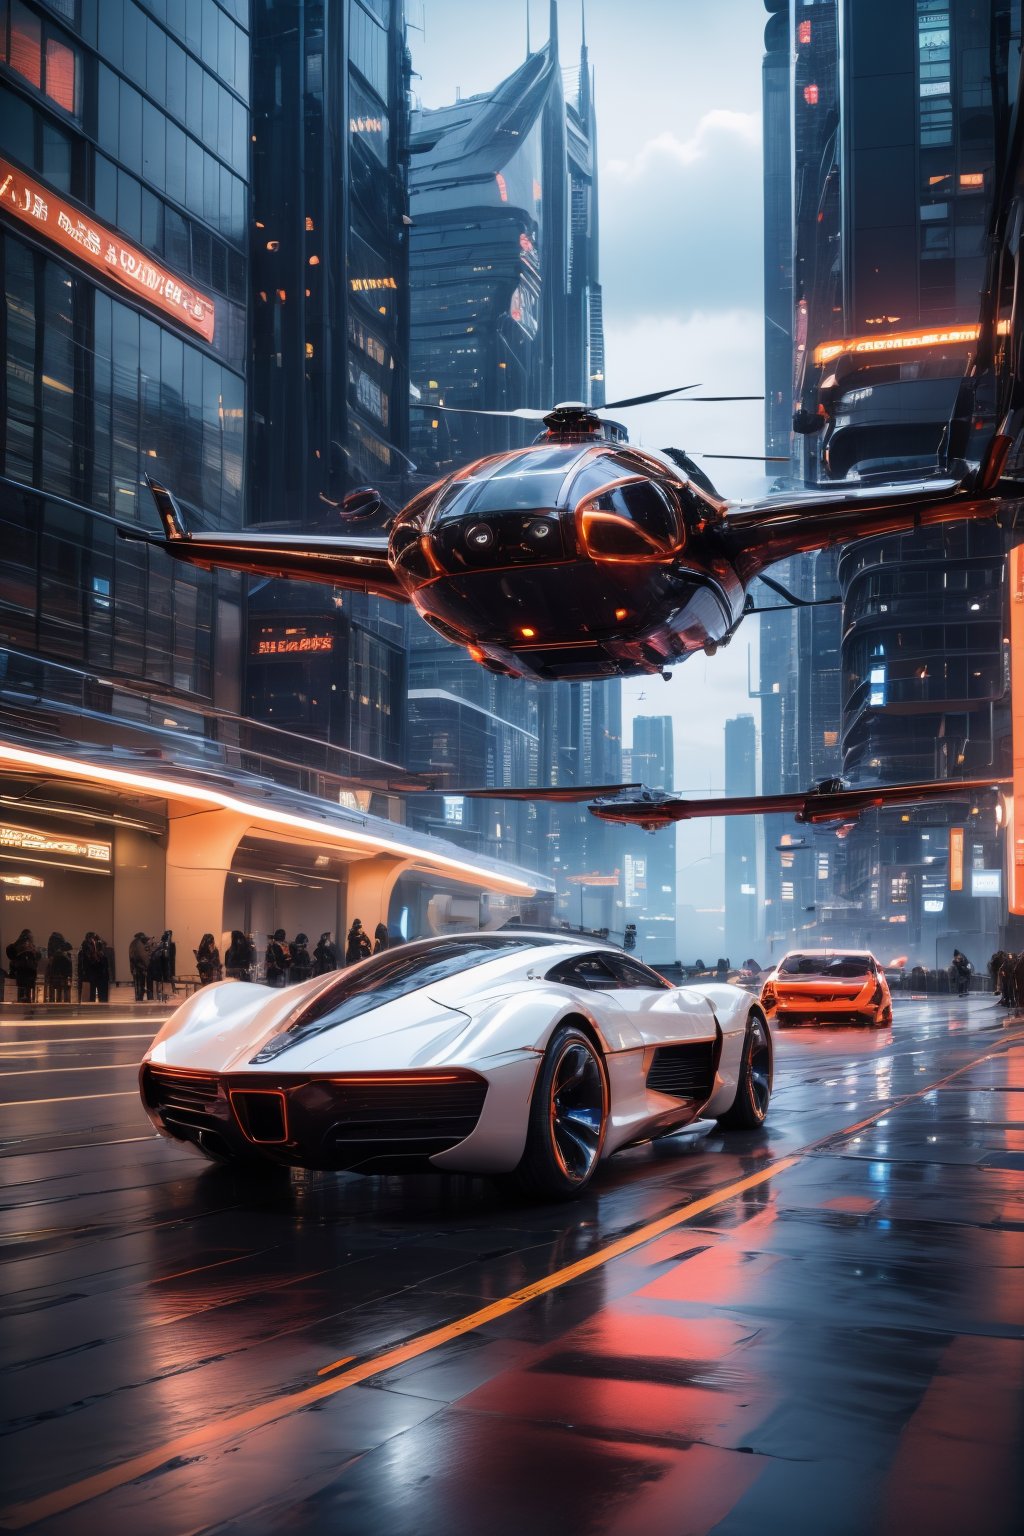 photorealistic, realistic, car, motor vehicle, science fiction, aircraft, city, flying, scenery, helicopter, sky, cloud, realistic, night, skyscraper, cyberpunk